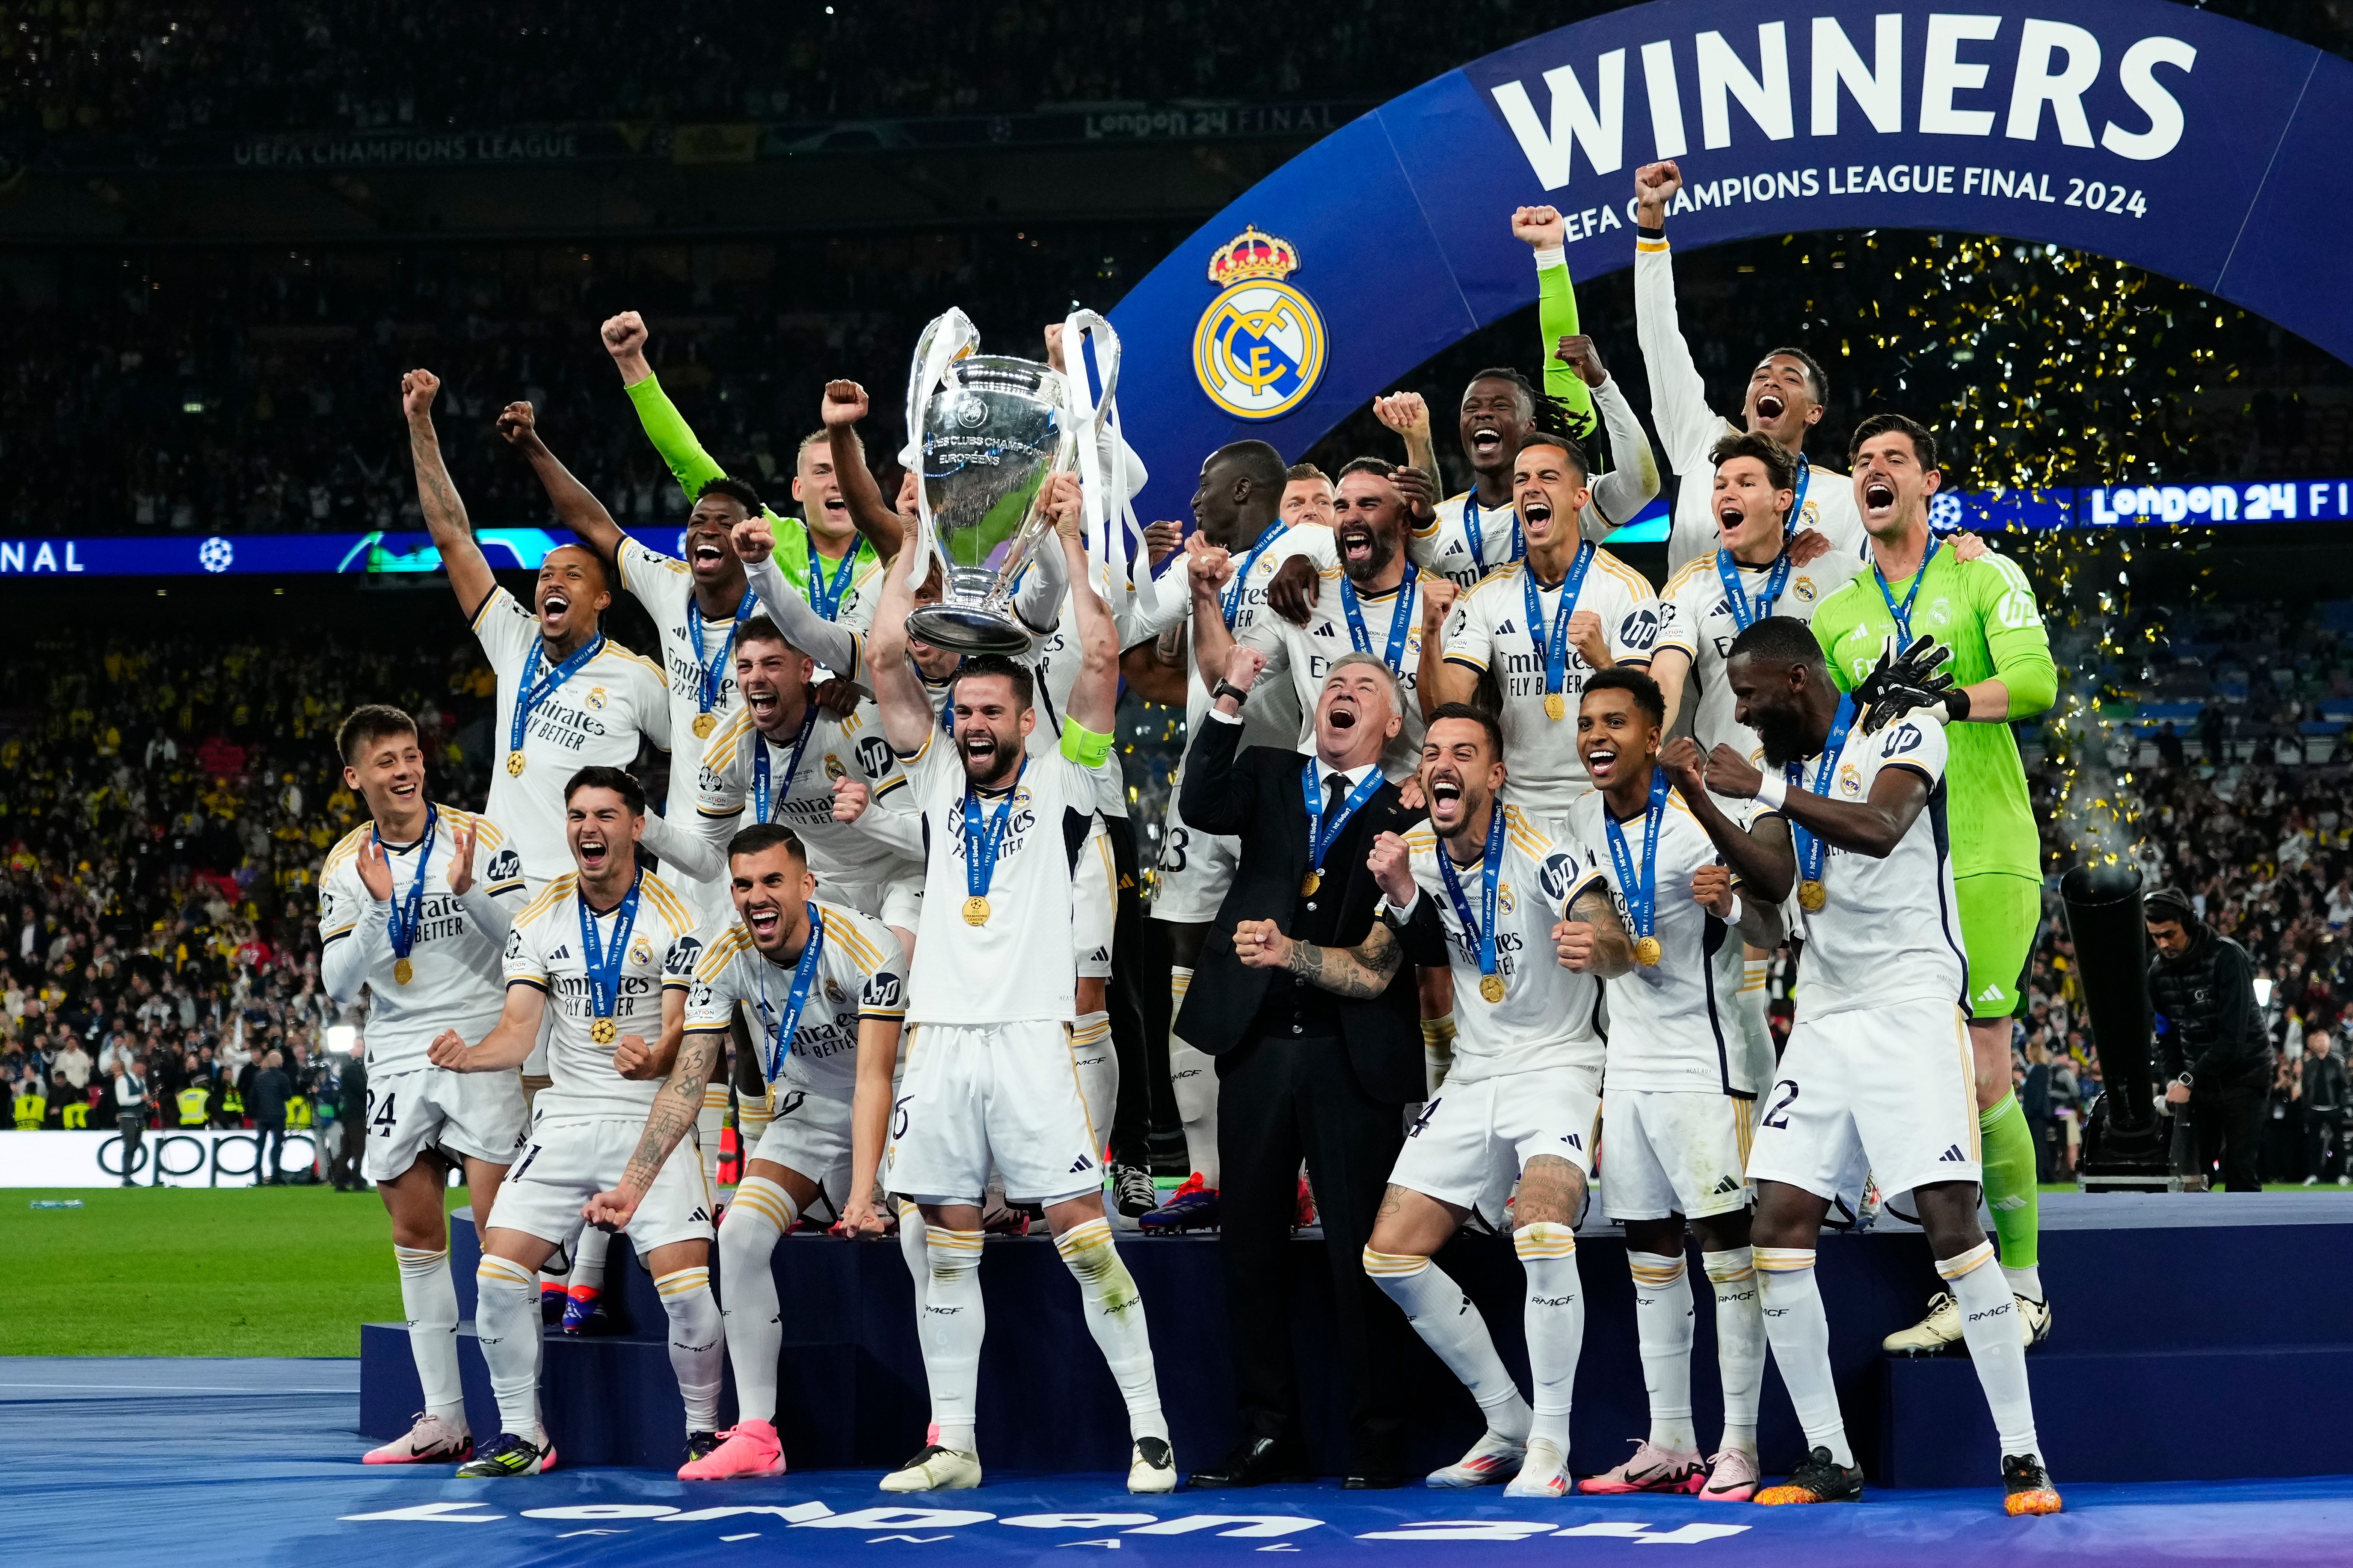 Real Madrid took home European football's most prestigious trophy after the game